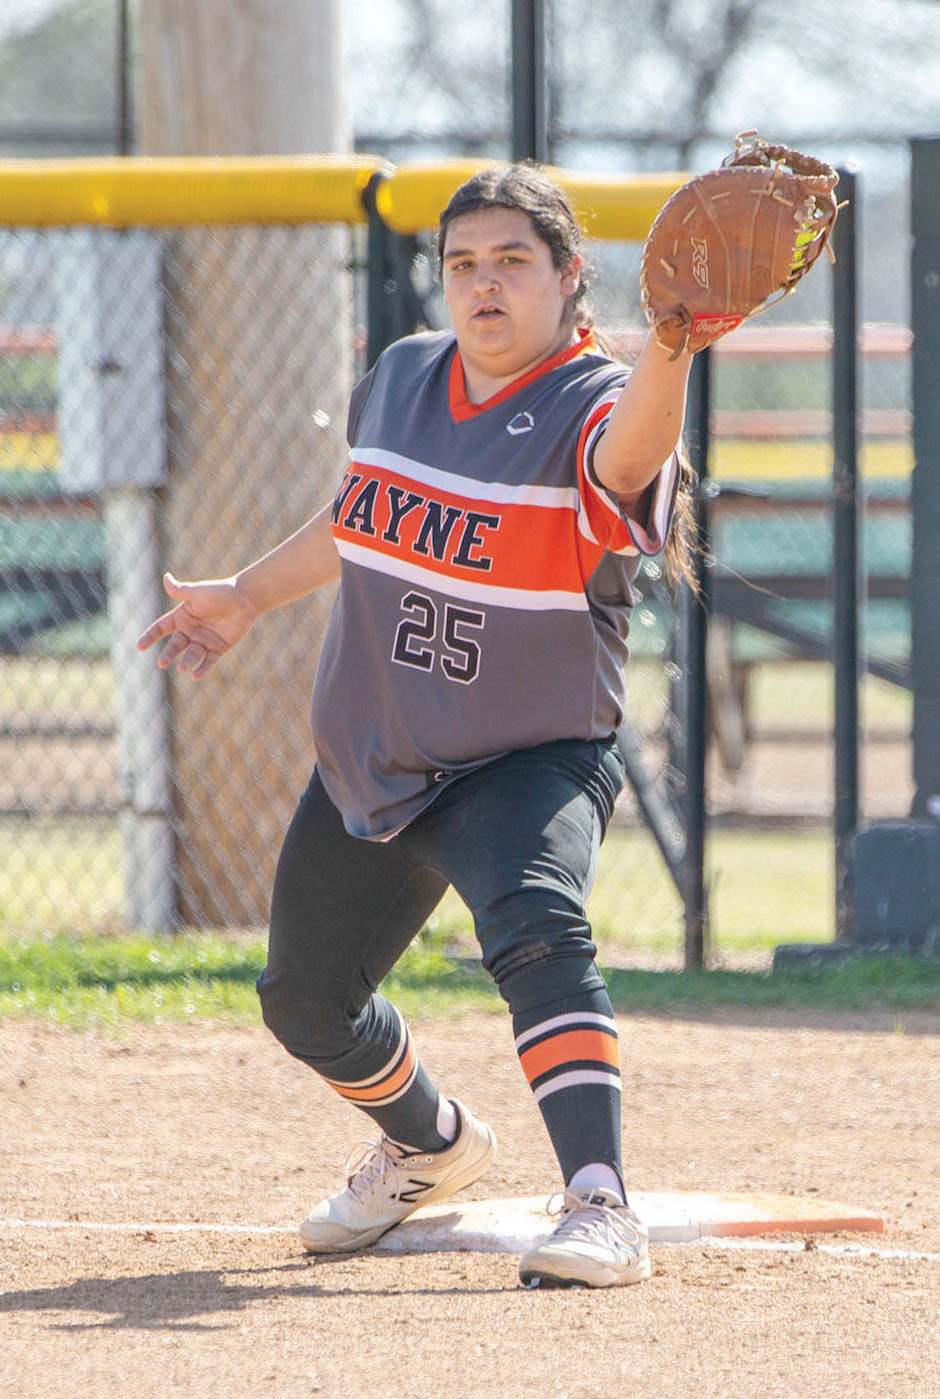 Wayne senior first baseman Mayce Trejo collects the ball for another out for the Bulldogs. Wayne was defeated 10-2 Tuesday in the State tournament by Tushka, ending their season.